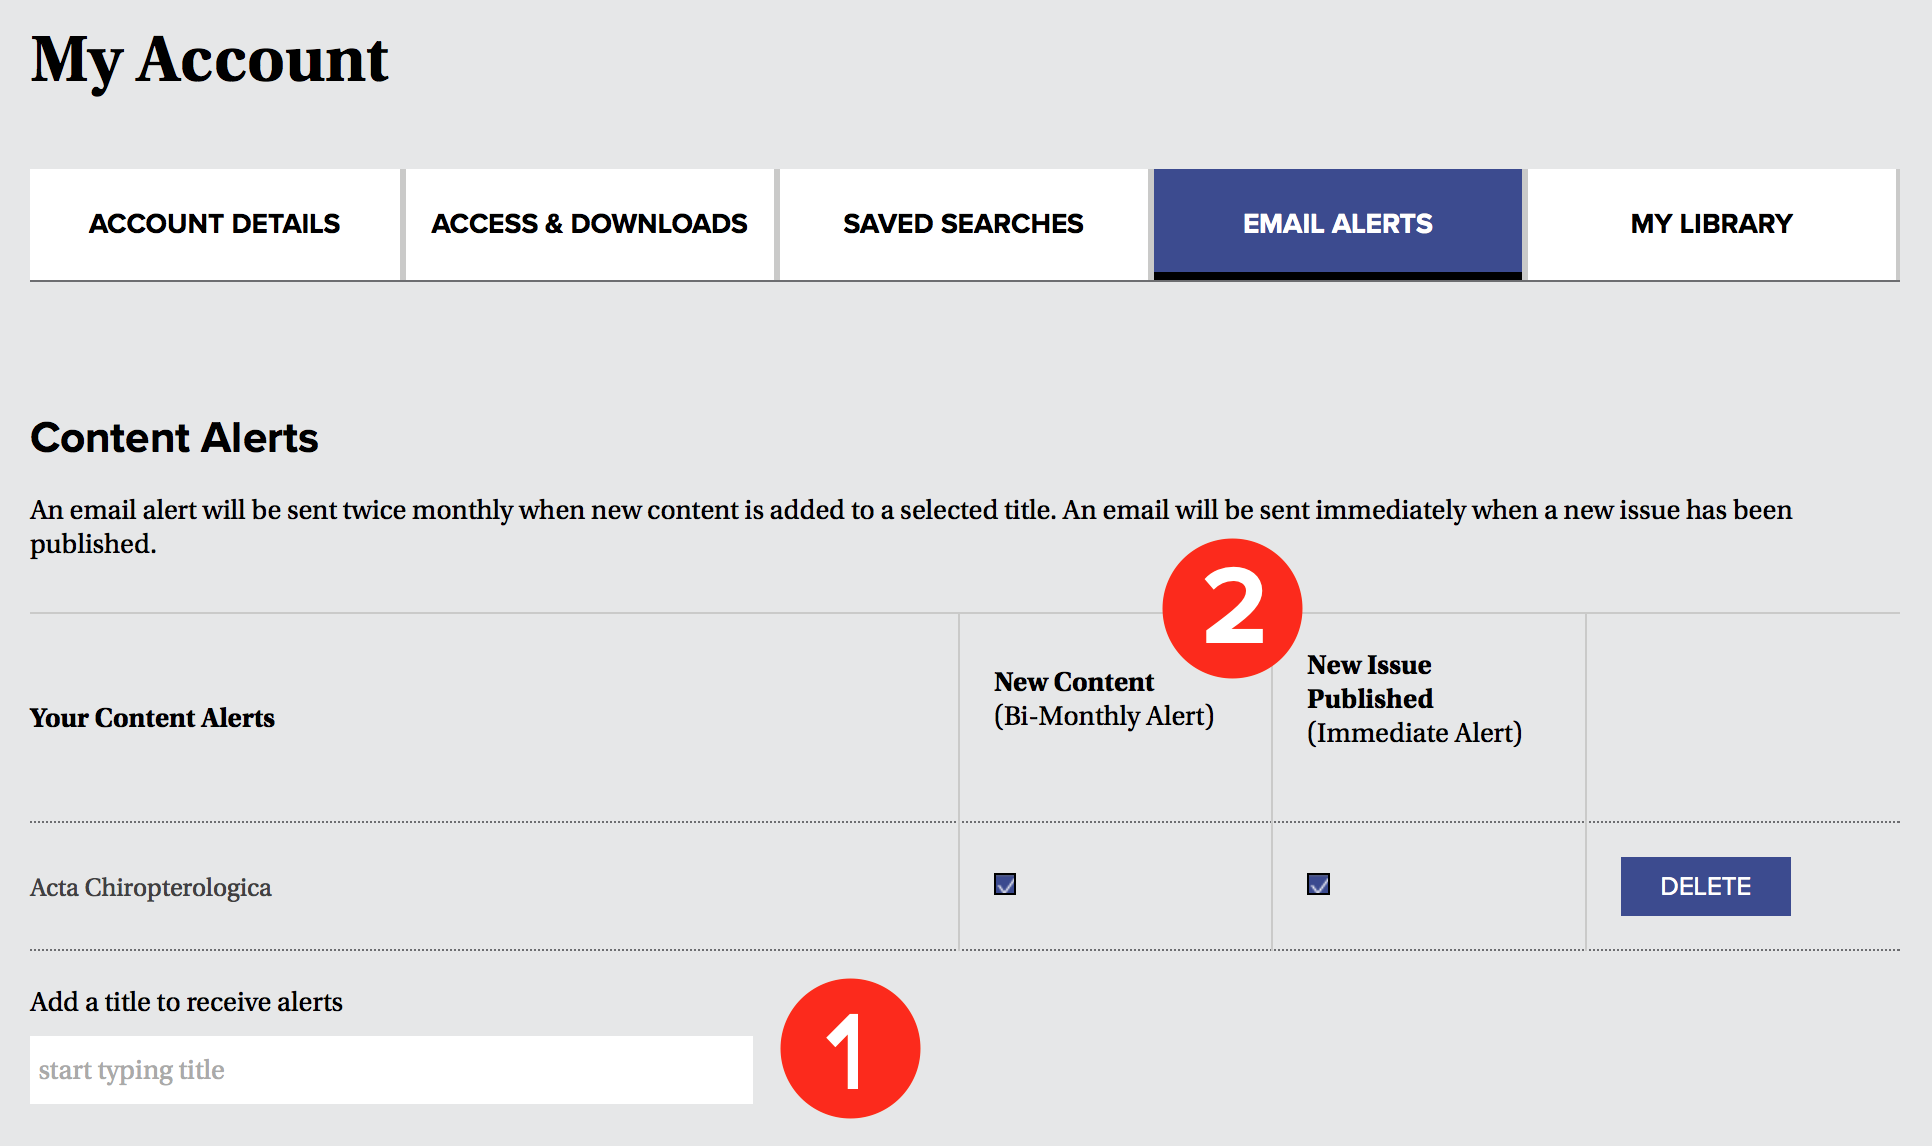 A screenshot of the Content Alert portion of the Email Alert tab. A number 1 indicates the field to enter journal titles, and a number 2 indicates the alert frequency options.